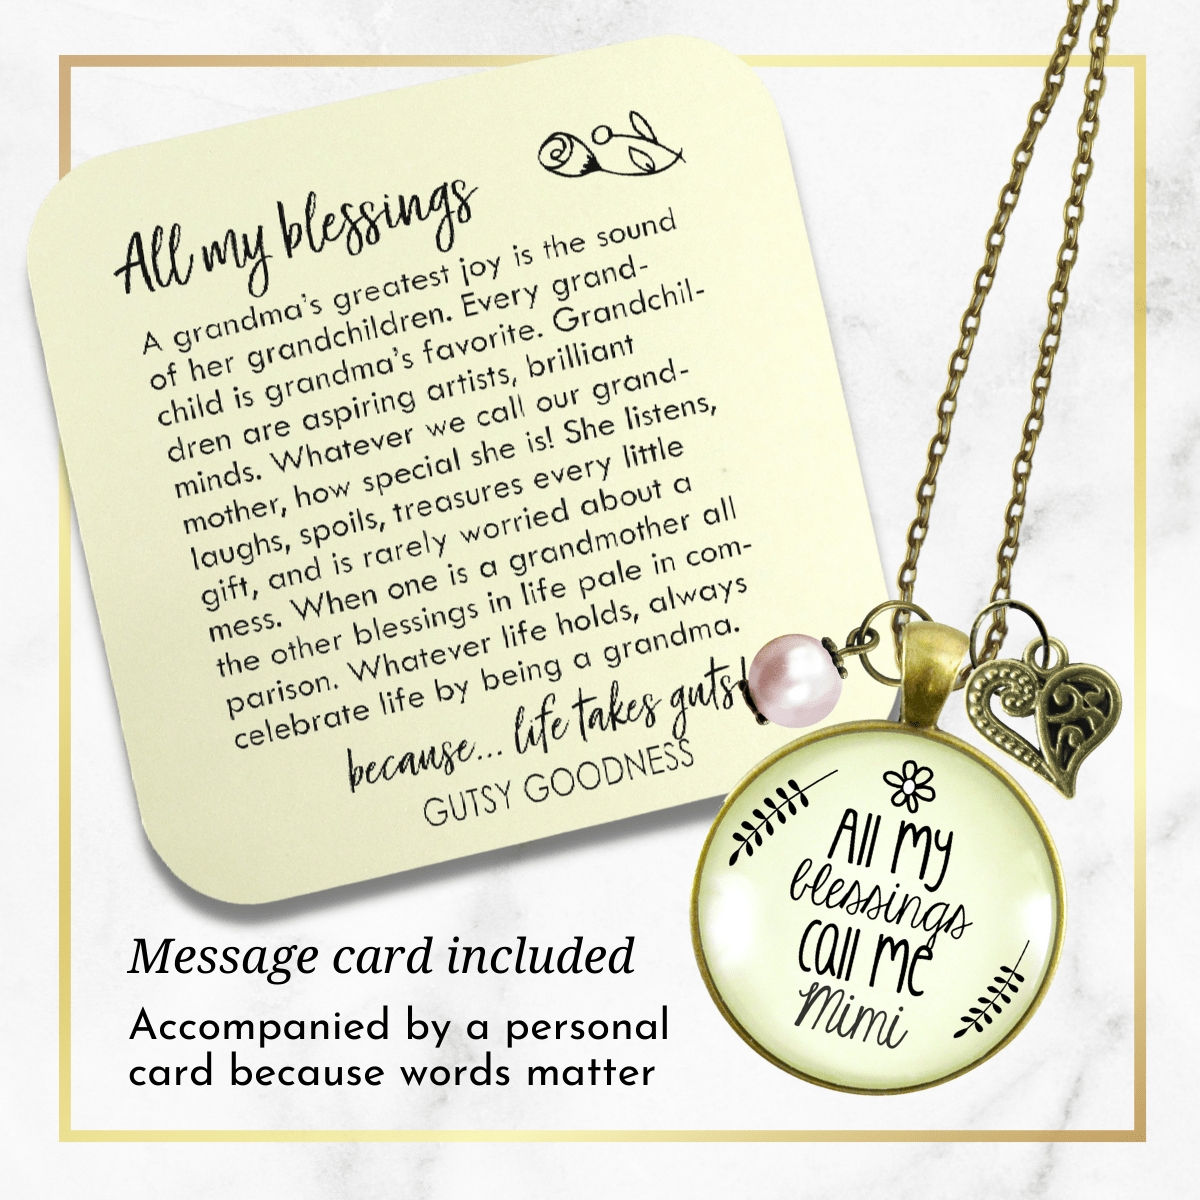 Gutsy Goodness Mimi Necklace All My Blessings Sweet Mimi Grandma Womens Family Gift Jewelry - Gutsy Goodness Handmade Jewelry;Mimi Necklace All My Blessings Sweet Mimi Grandma Womens Family Gift Jewelry - Gutsy Goodness Handmade Jewelry Gifts